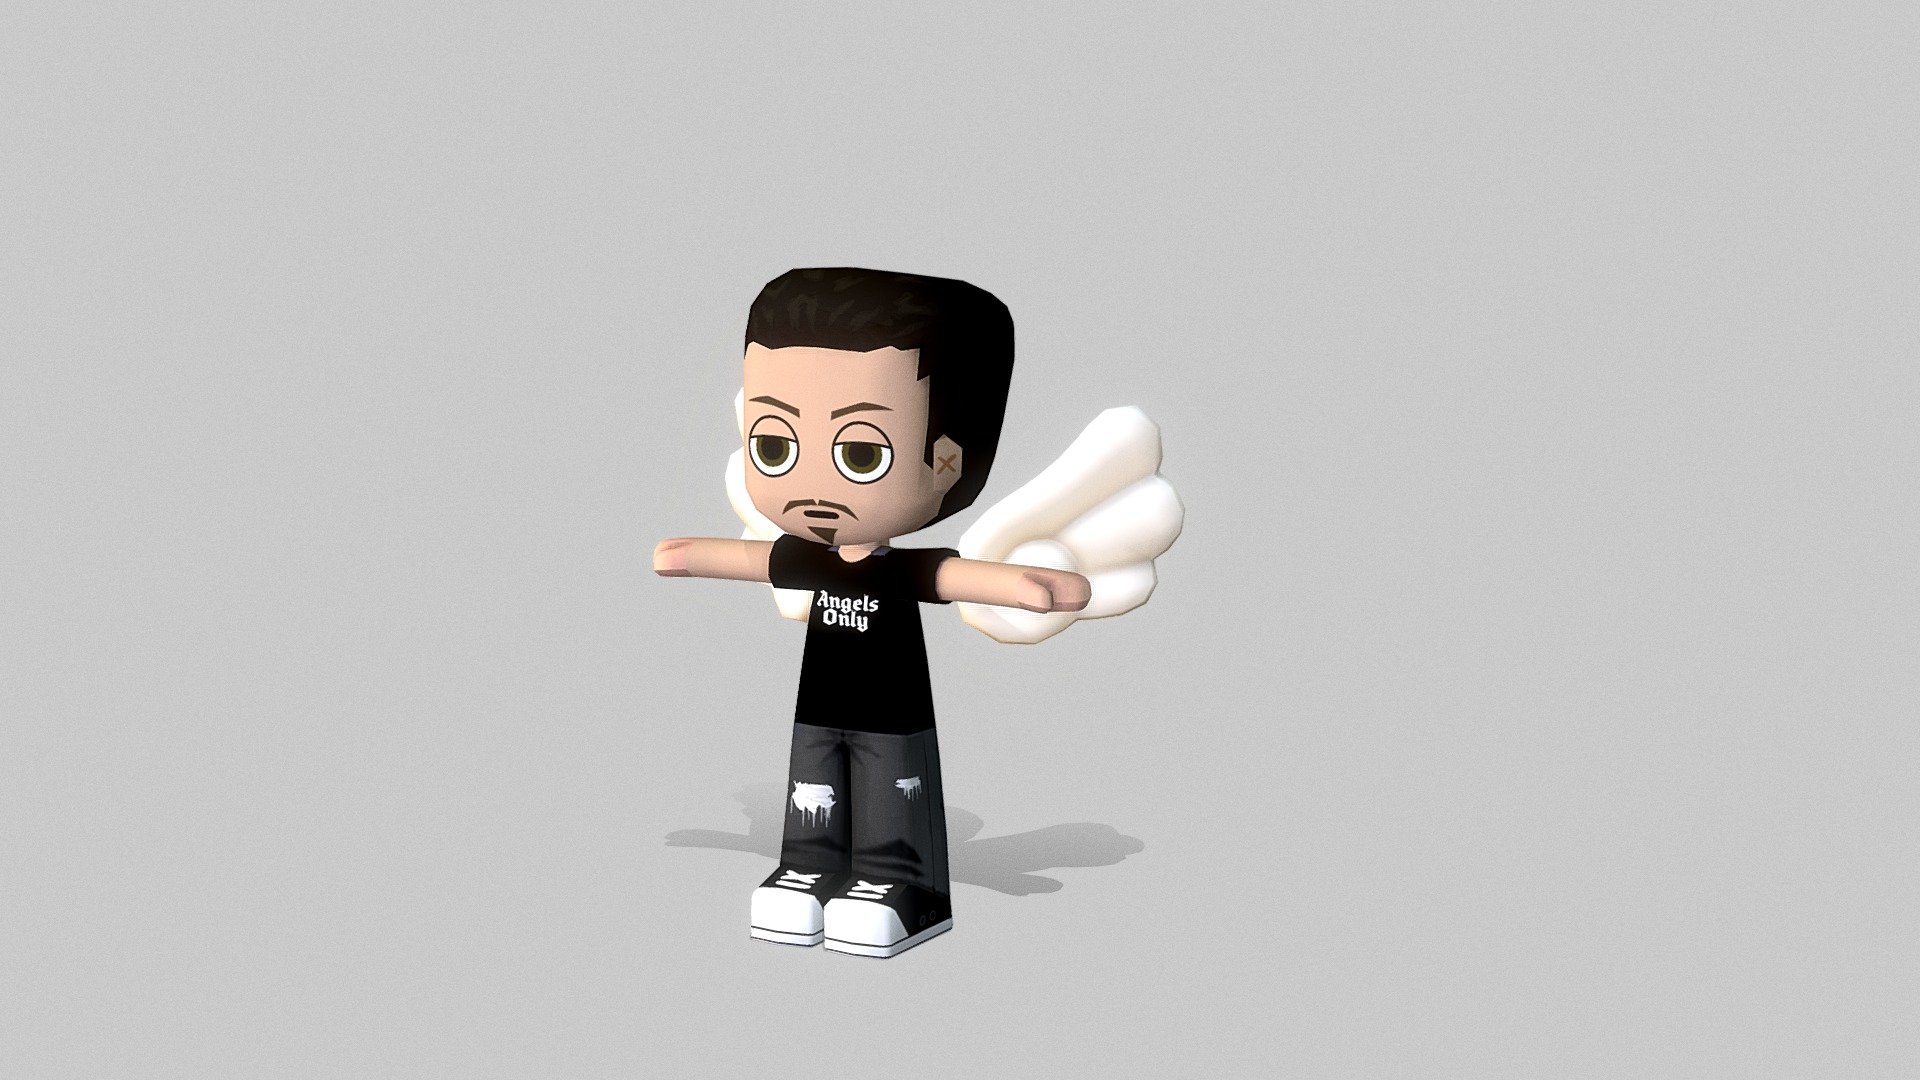 3D rendition of my brother in the style of MySims.

Feel free to contact me about 3D commissions to make one of these to look like you!

angelsonly.supply - WZY Mysims Rendition - 3D model by Angels Only Supply (@AngelsOnly) 3d model